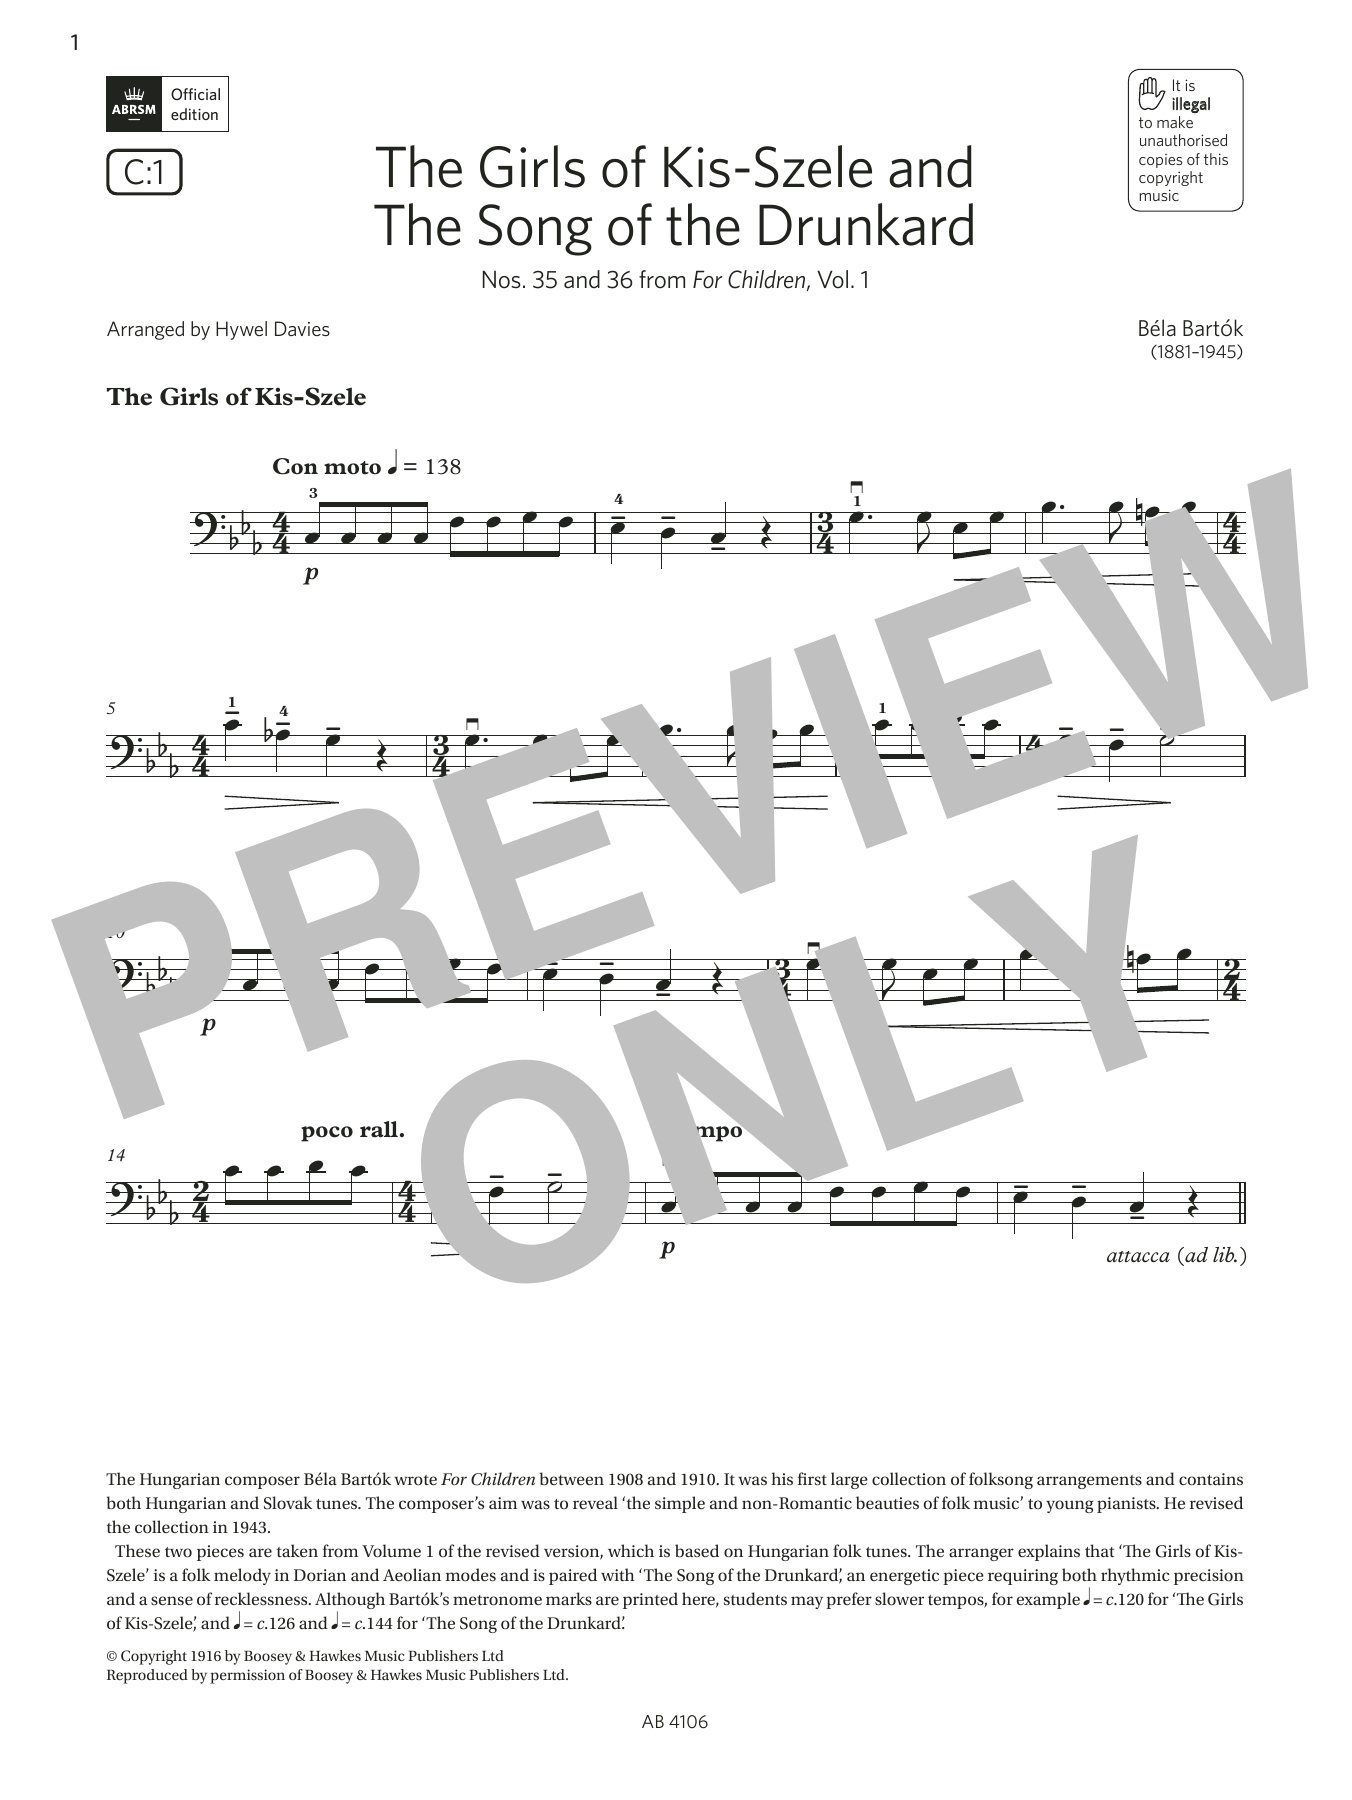 Download Béla Bartók The Girls of Kis-Szele and The Song of Sheet Music